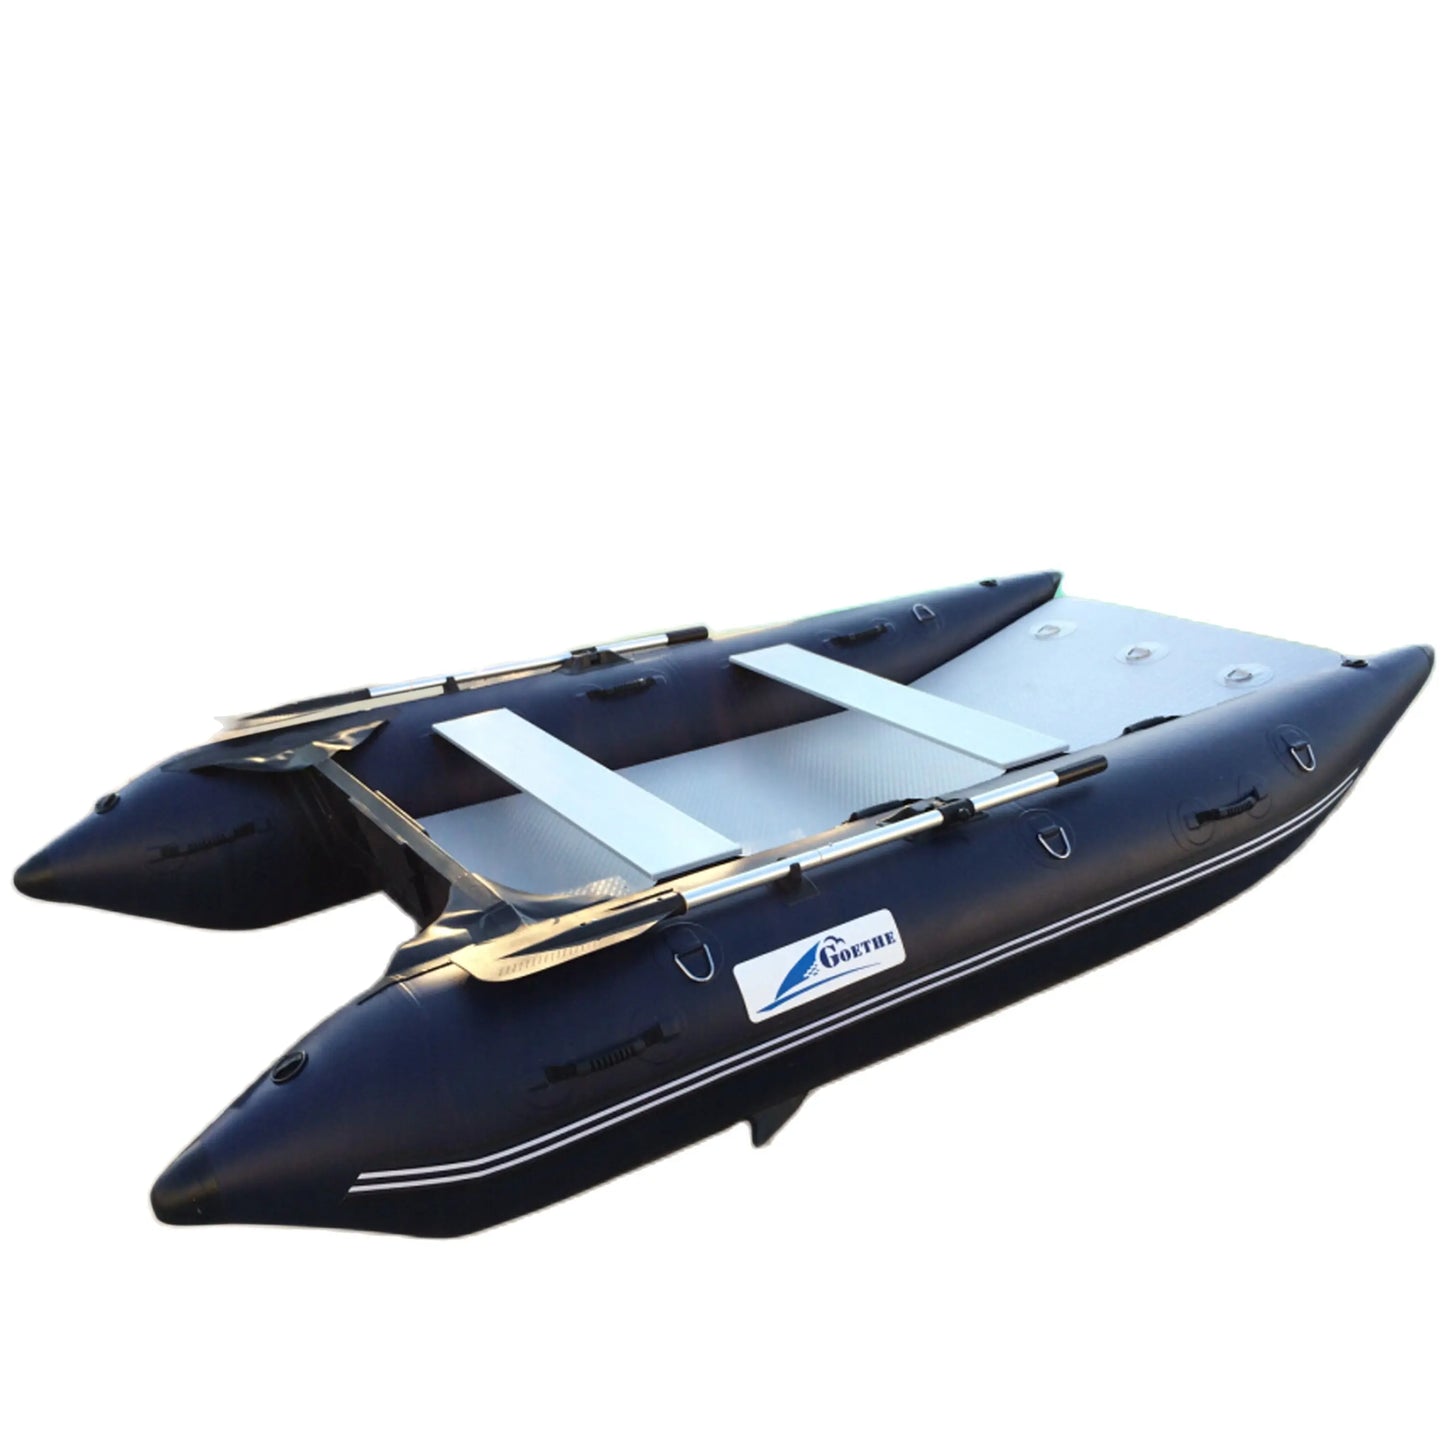 Goboat MC330 Inflatable Boat High Speed Catamaran PVC Water Sports Multi-colors Surfing Drifting Camping Fishing Equipment